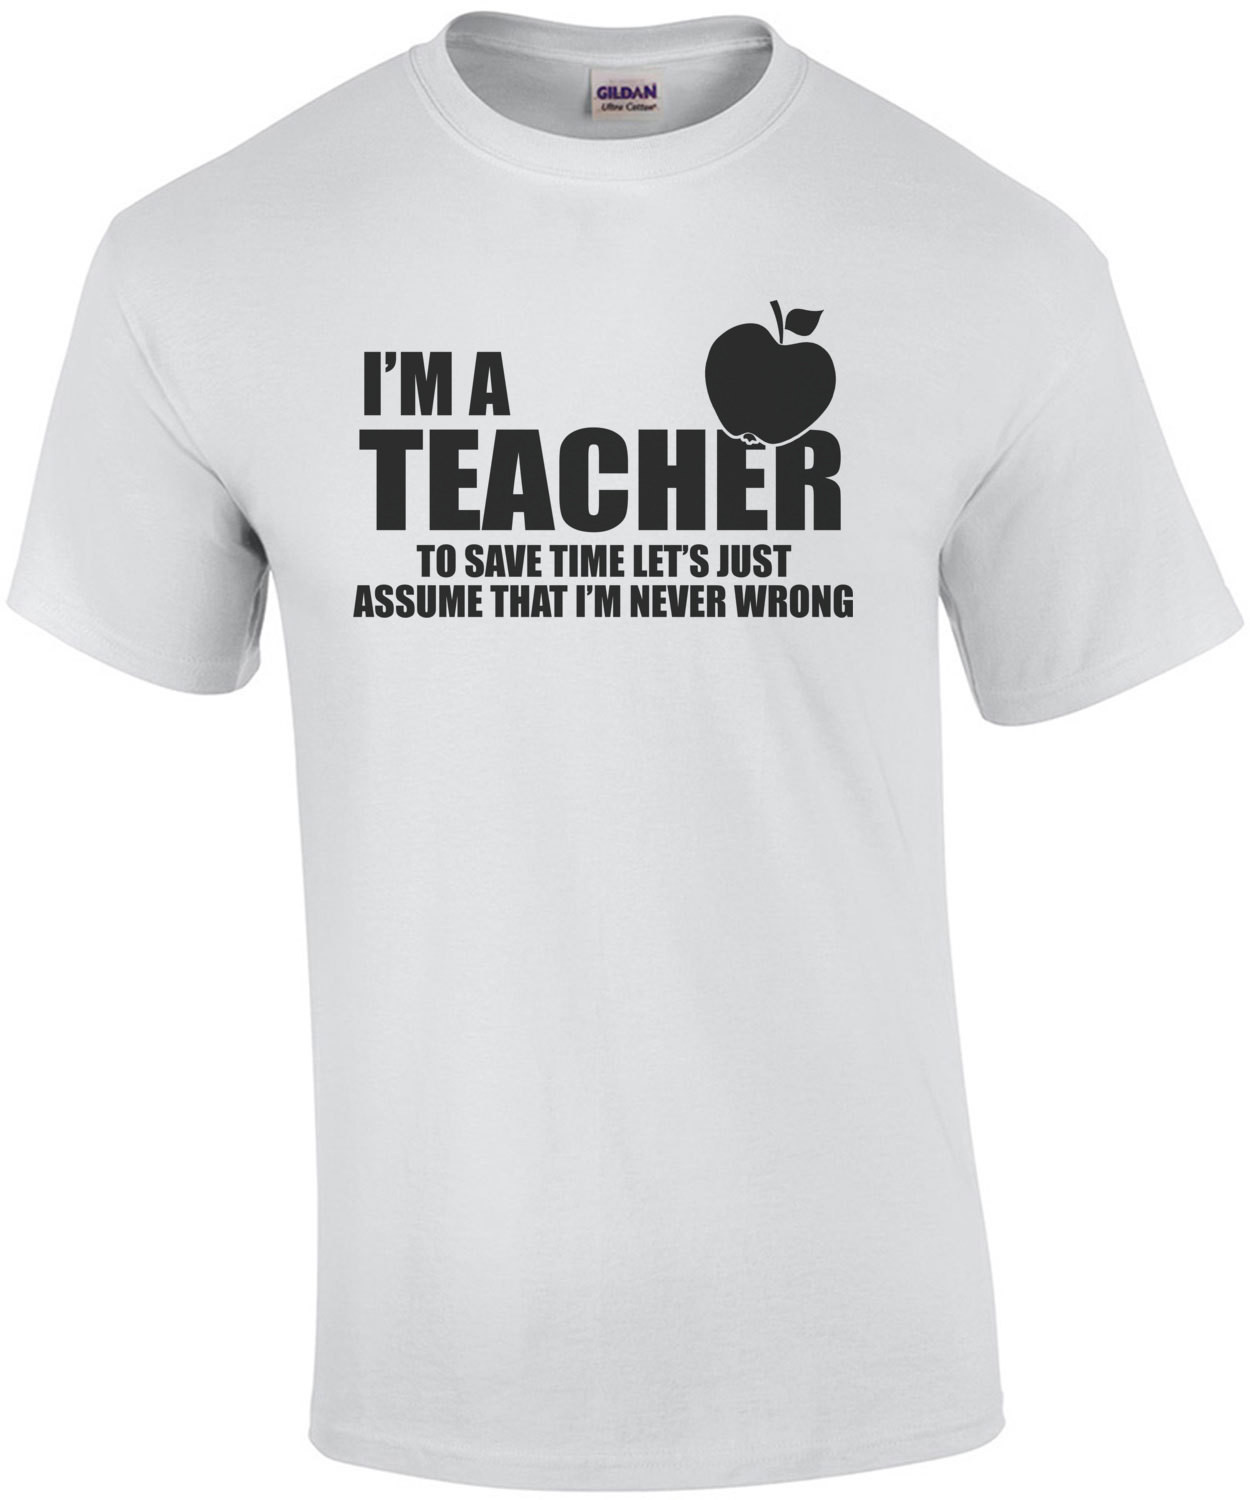 I'm A Teacher To Save Time Lets Just Assume That I'm Never Wrong T-Shirt